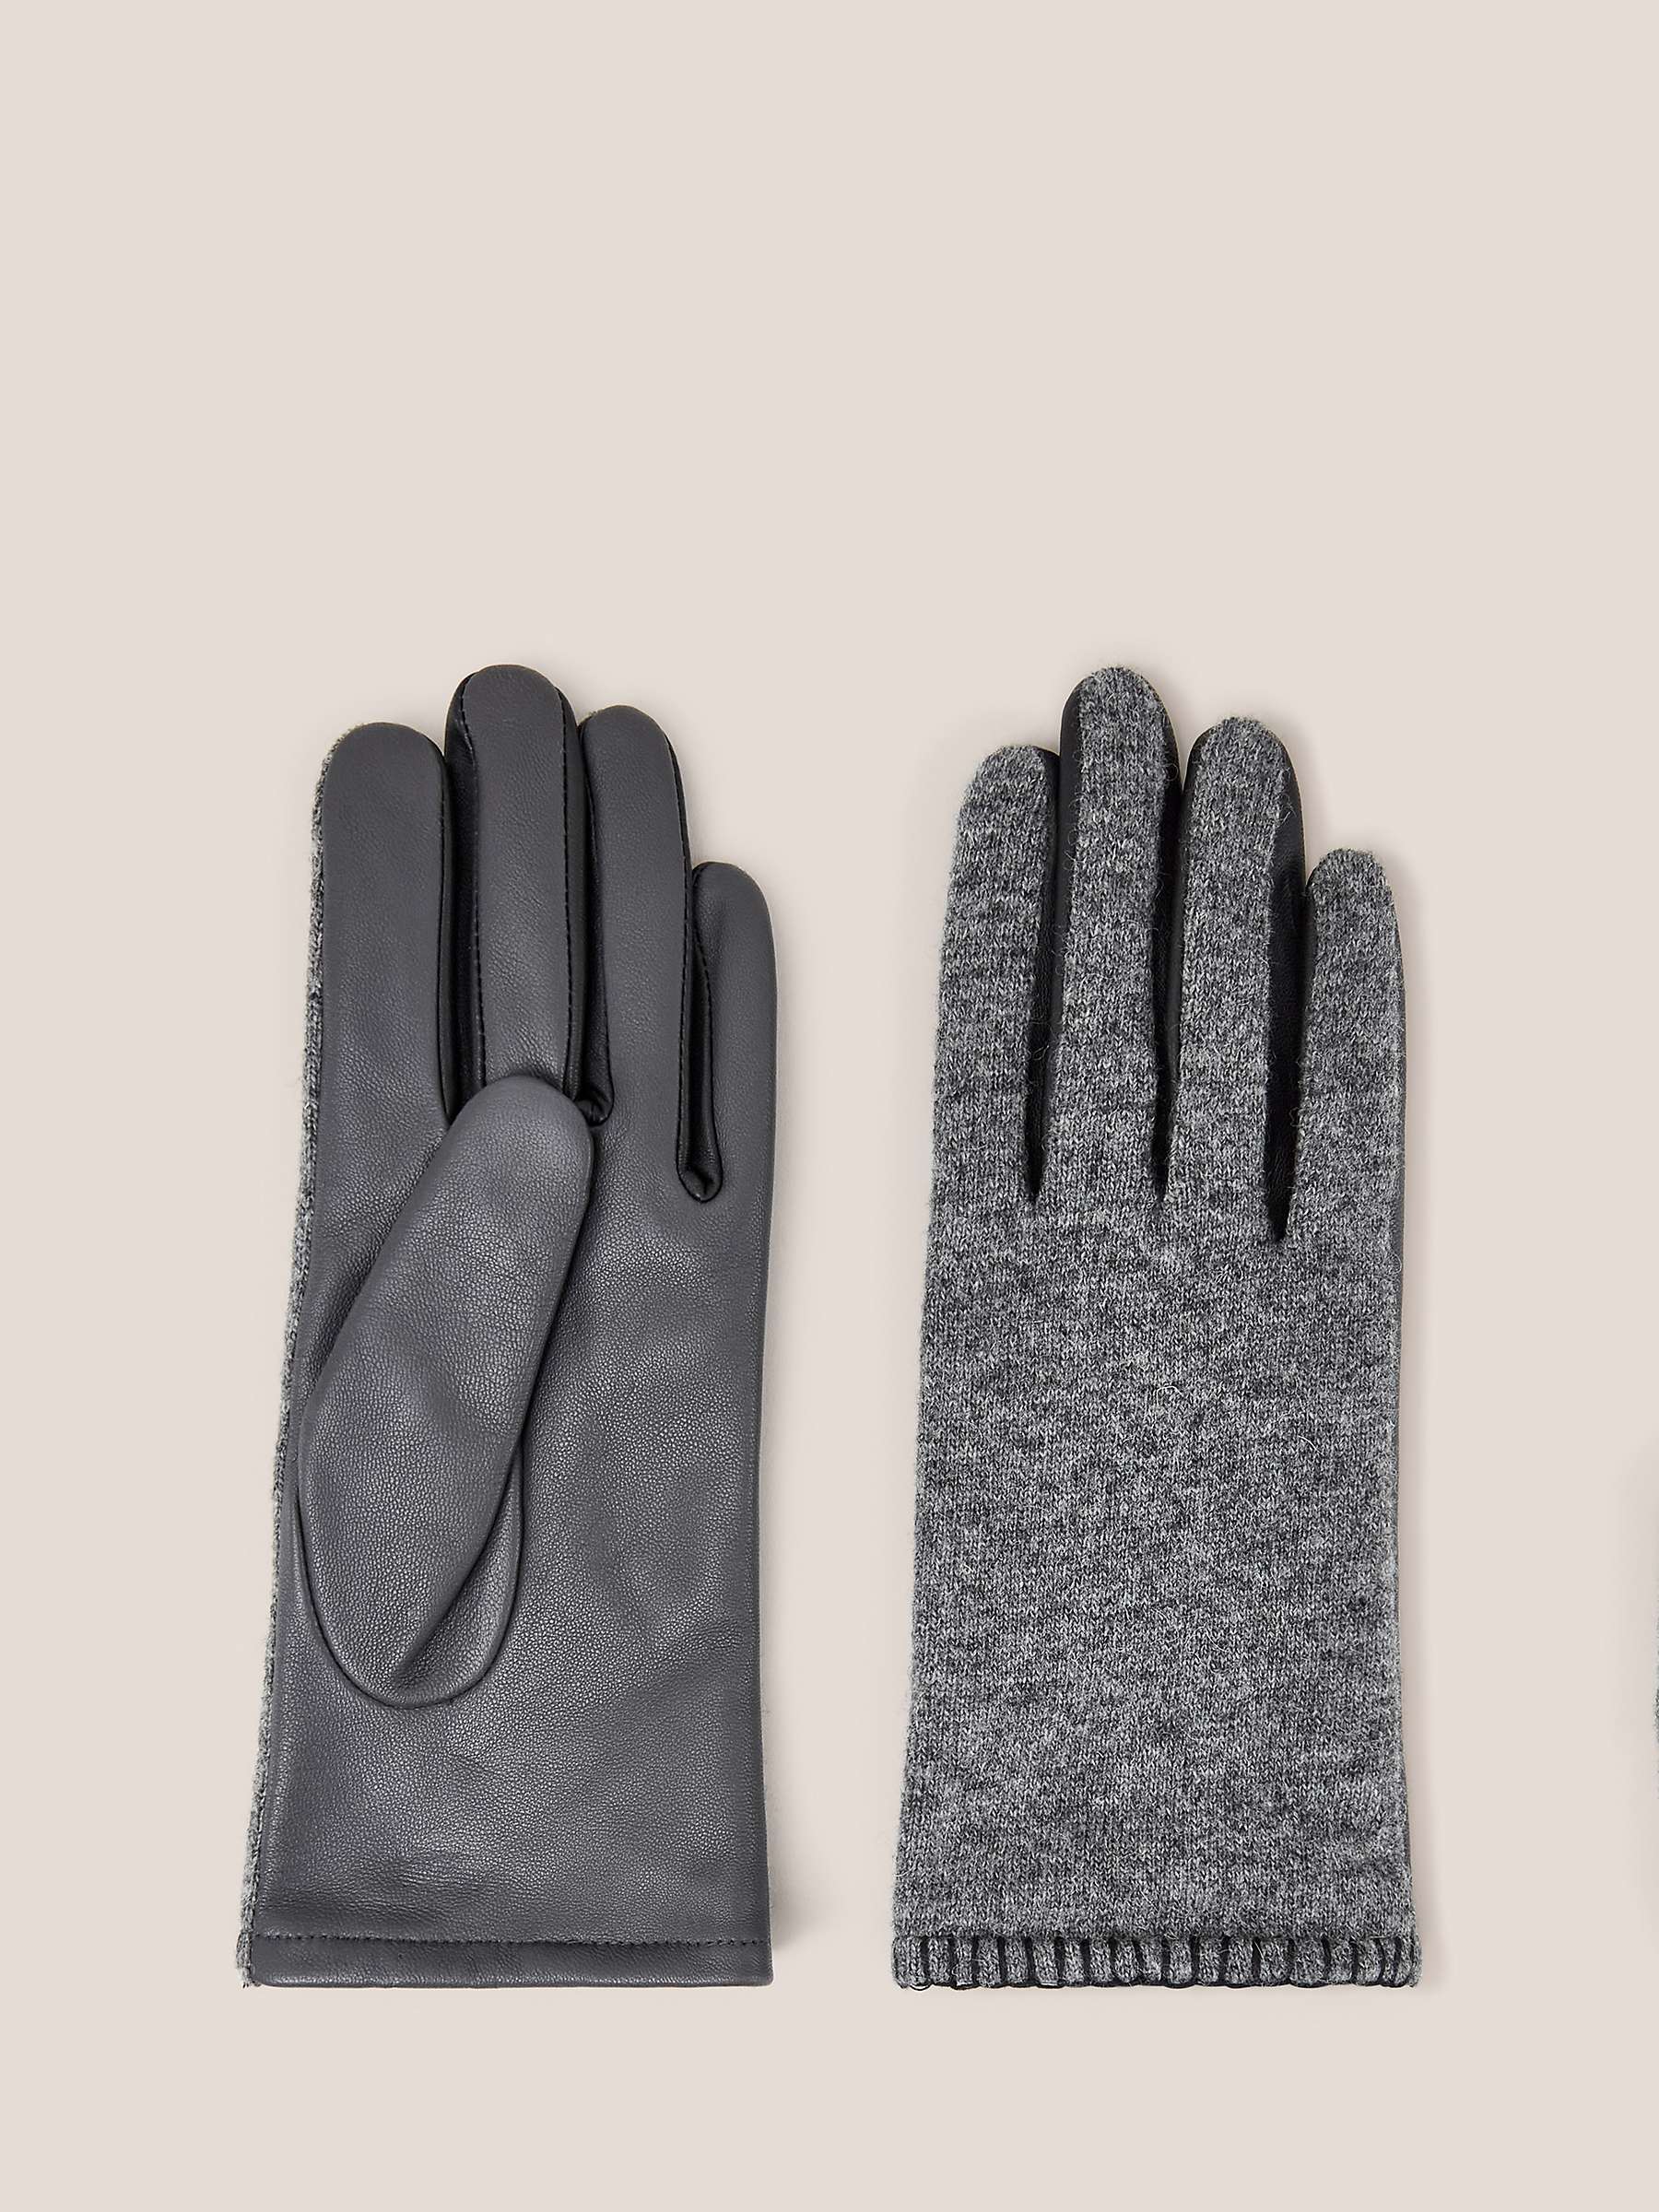 Buy White Stuff Lucie Leather Gloves Online at johnlewis.com